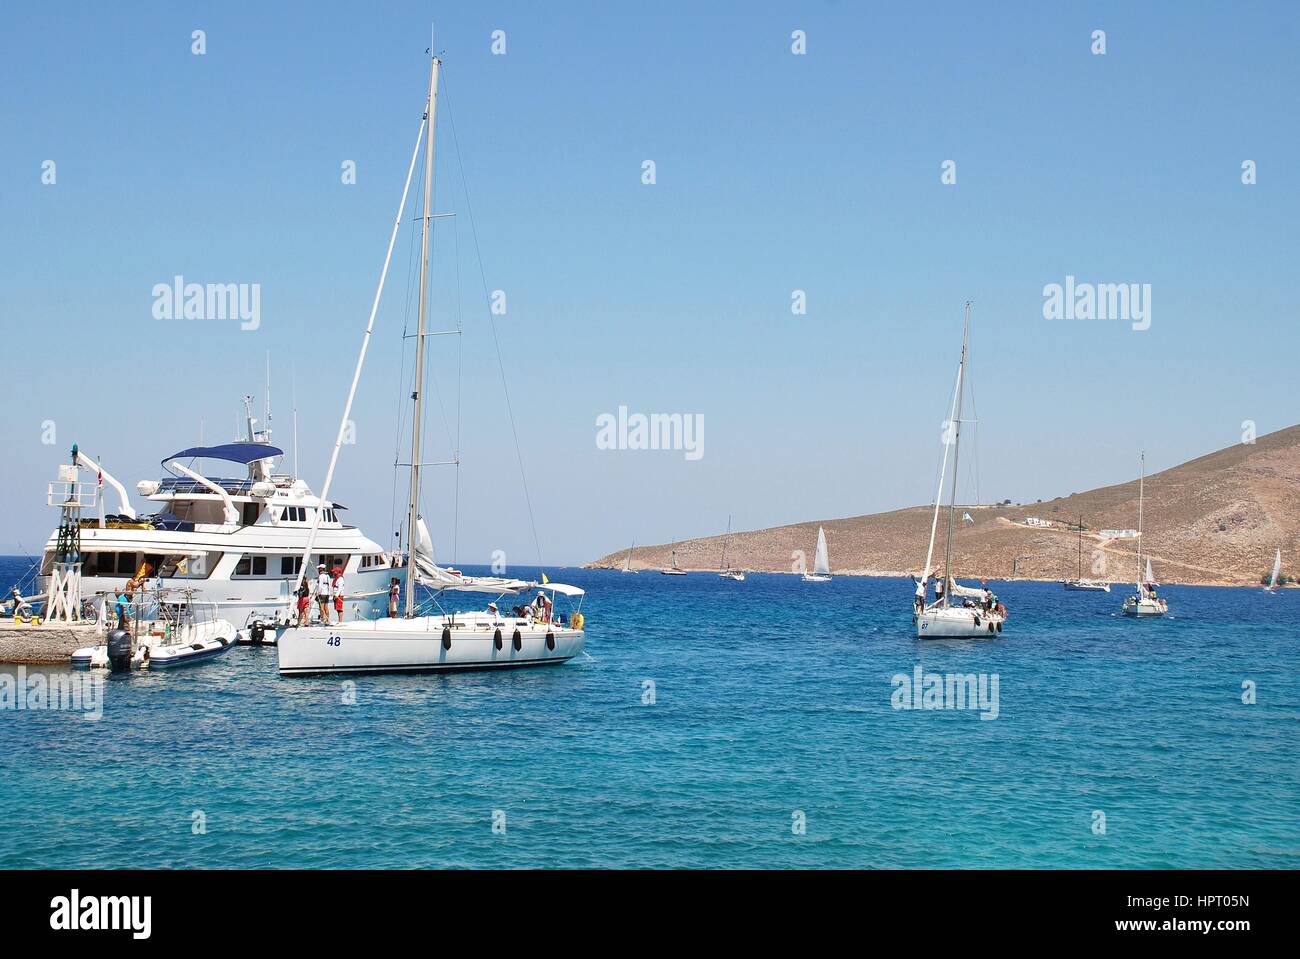 Competitors in the Rhodes Cup yacht race arrive in Livadia harbour on the Greek island of Tilos on July 19, 2016. The race is in its 20th year. Stock Photo